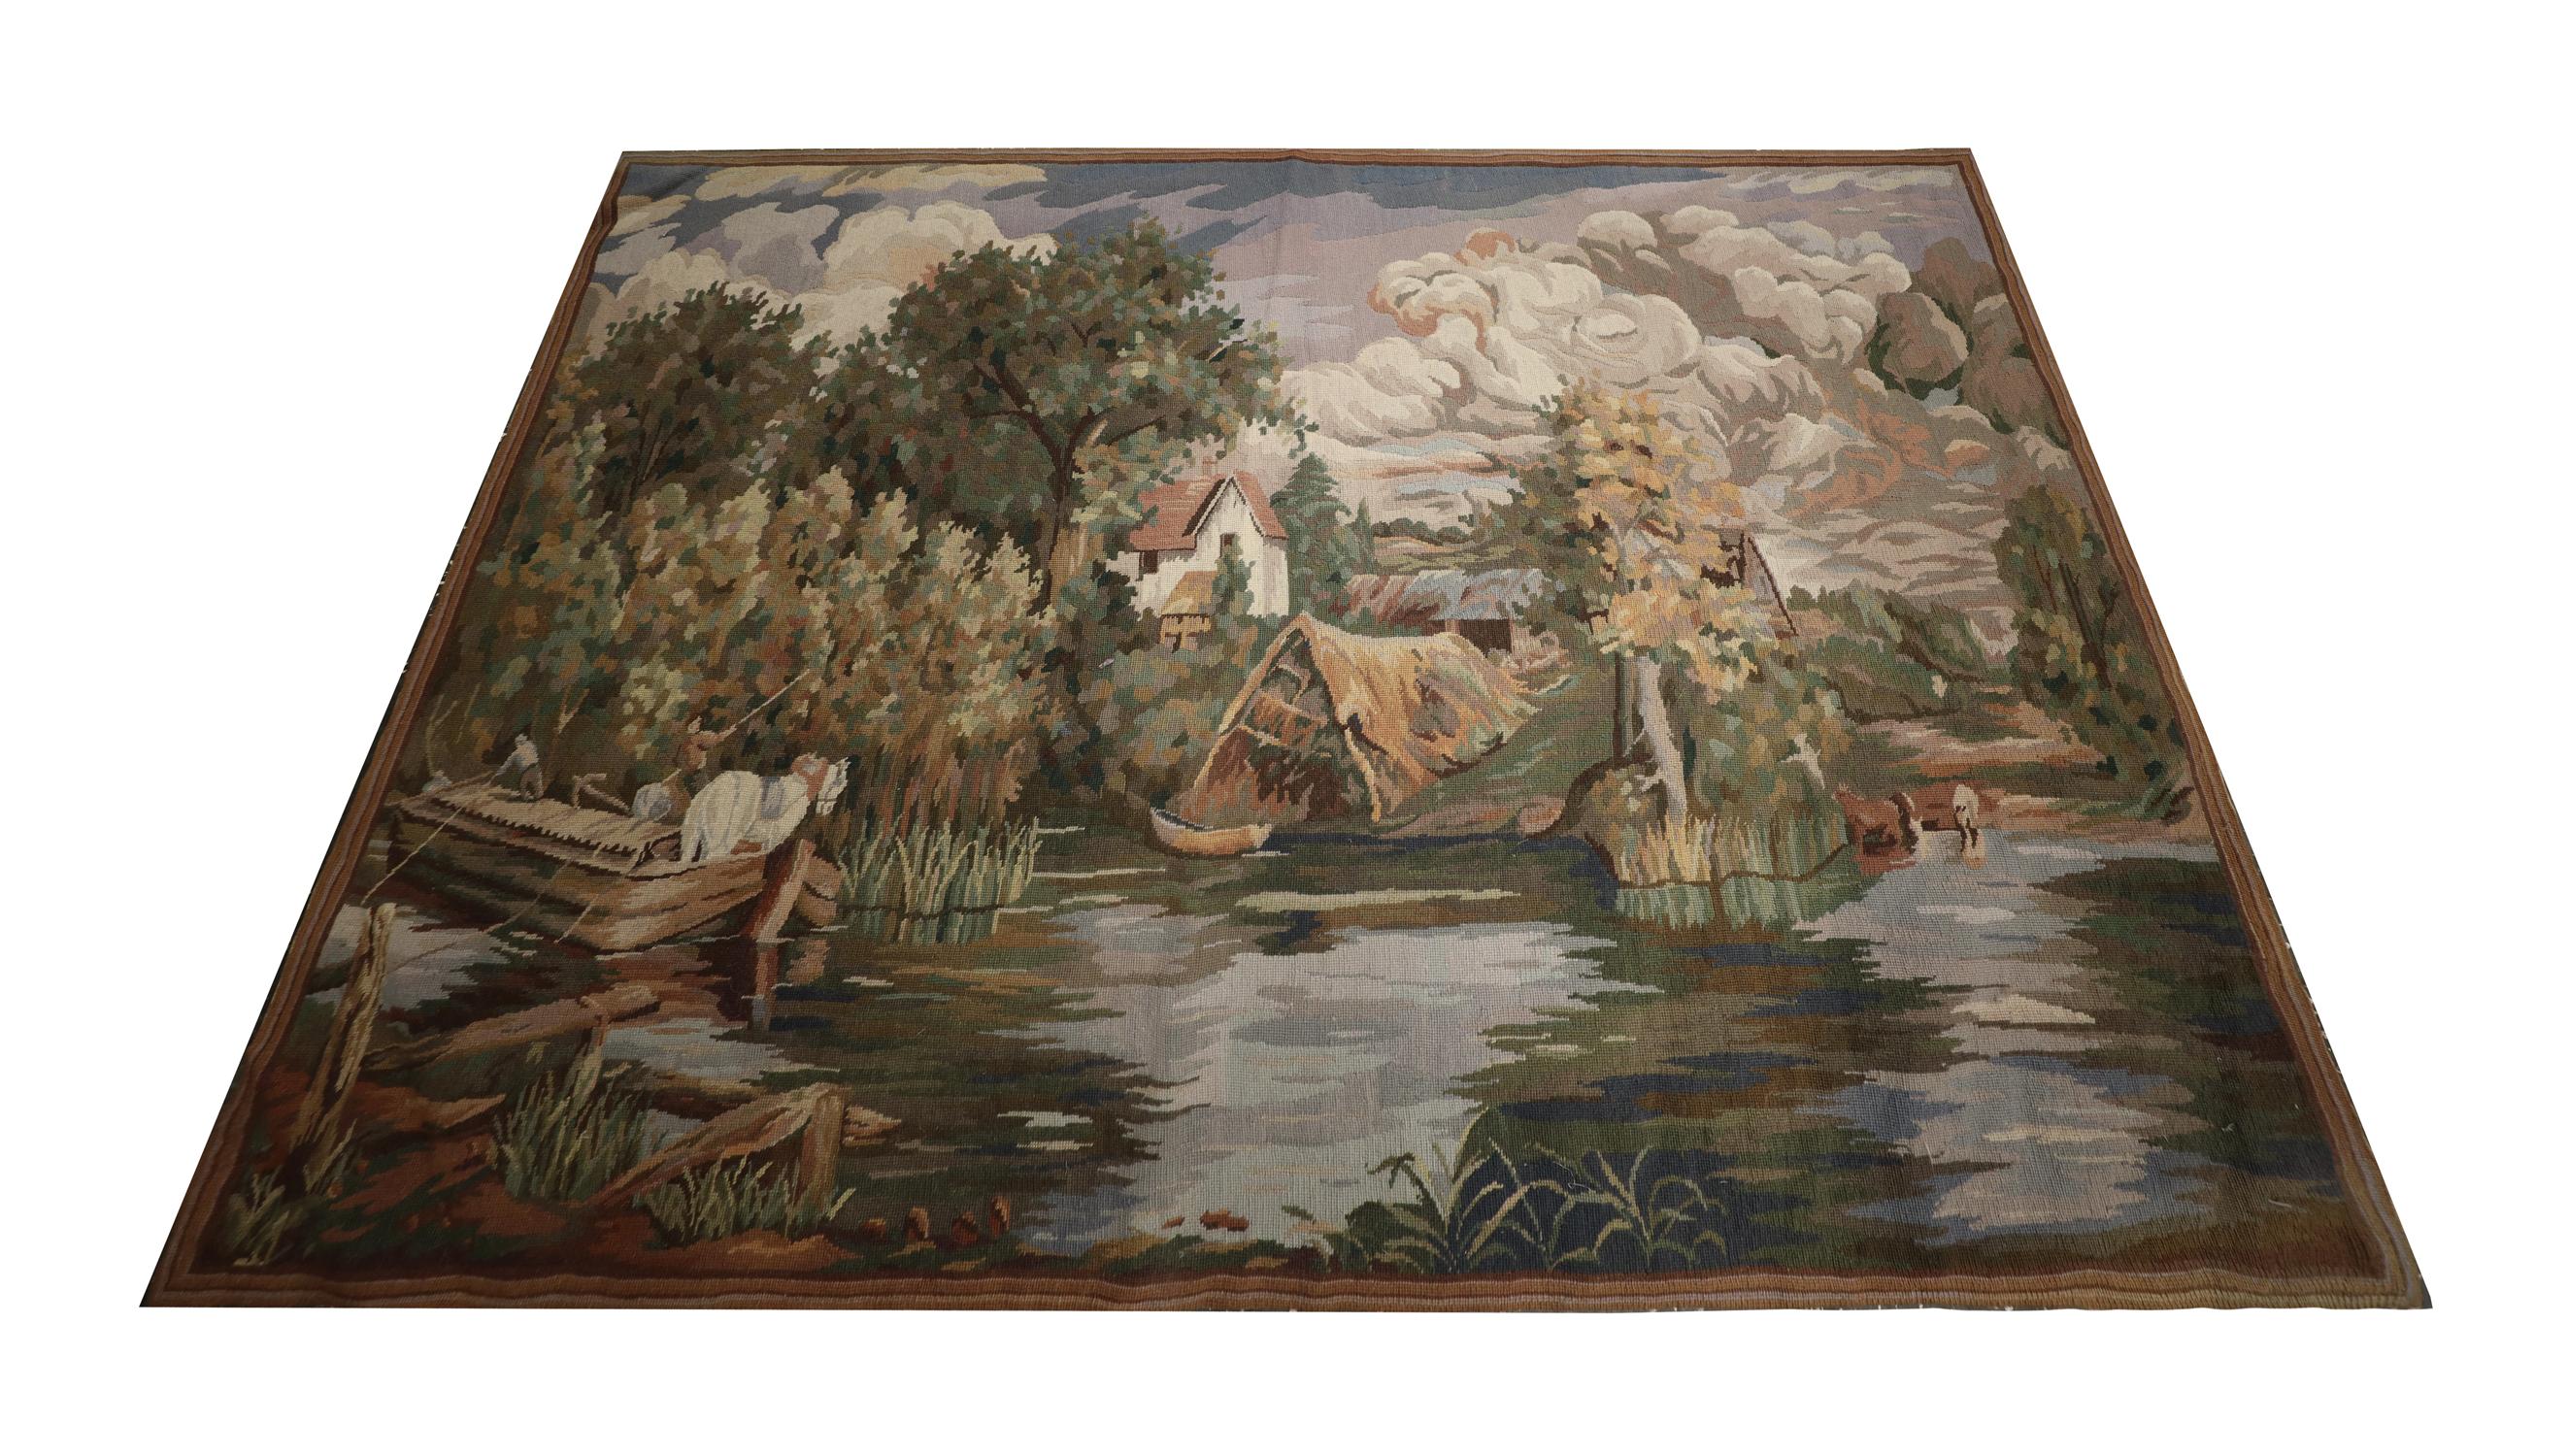 A fine example of tapestries woven by hand in the 21st century this piece will definitely enhance any room it is introduced to. The design of this Aubusson rug features a river scene with people, horses, houses and trees nestled among the skies and